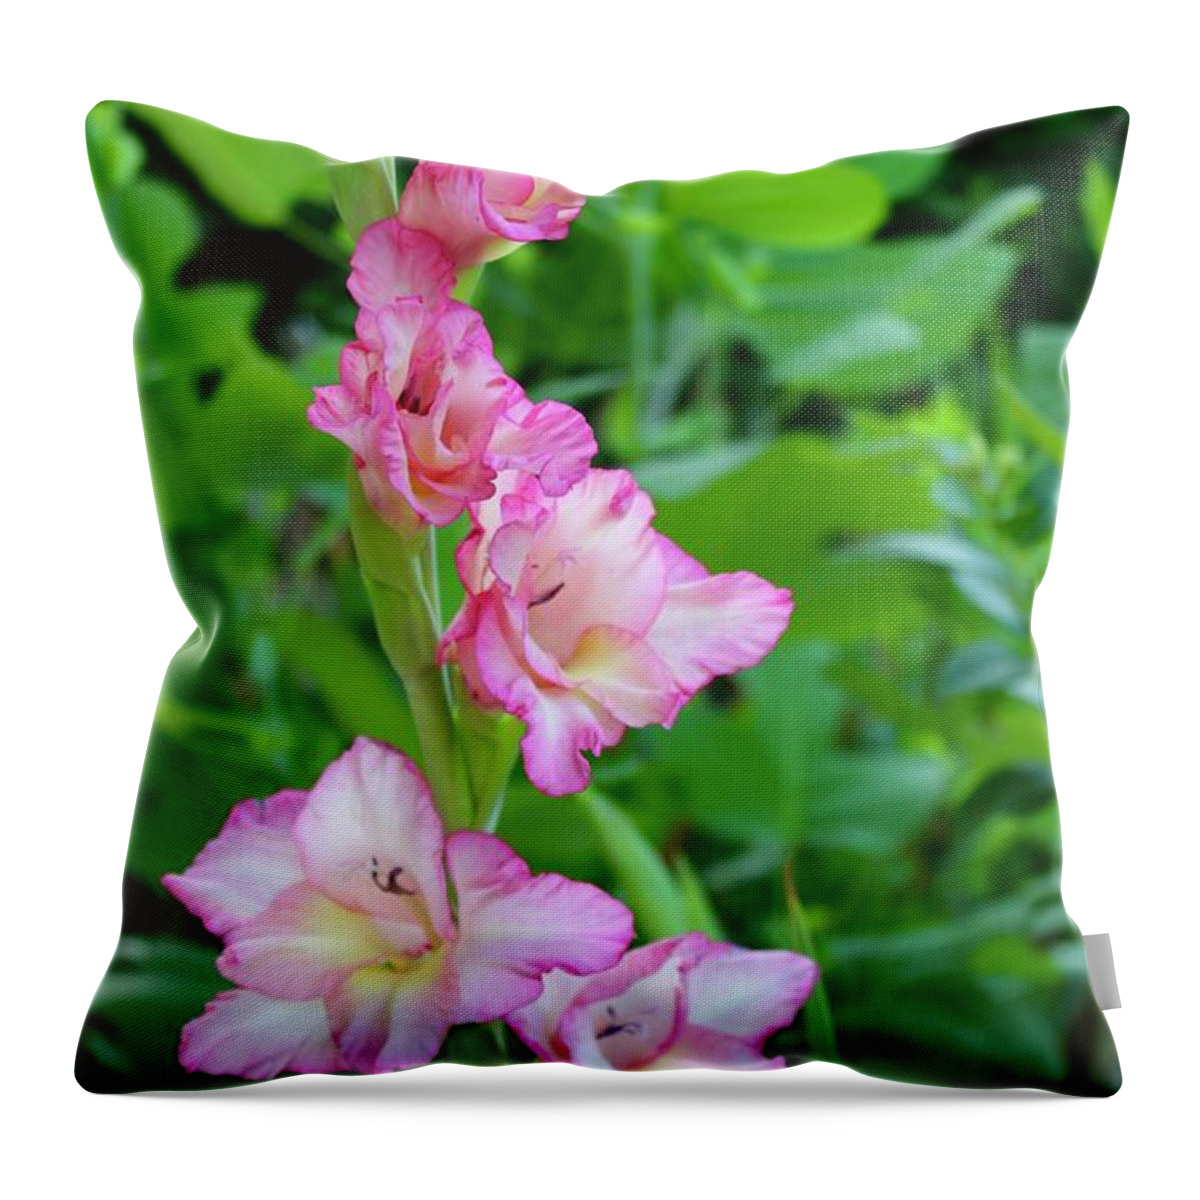 Photograph Throw Pillow featuring the photograph Sunrise Gladiolas Flores by M E